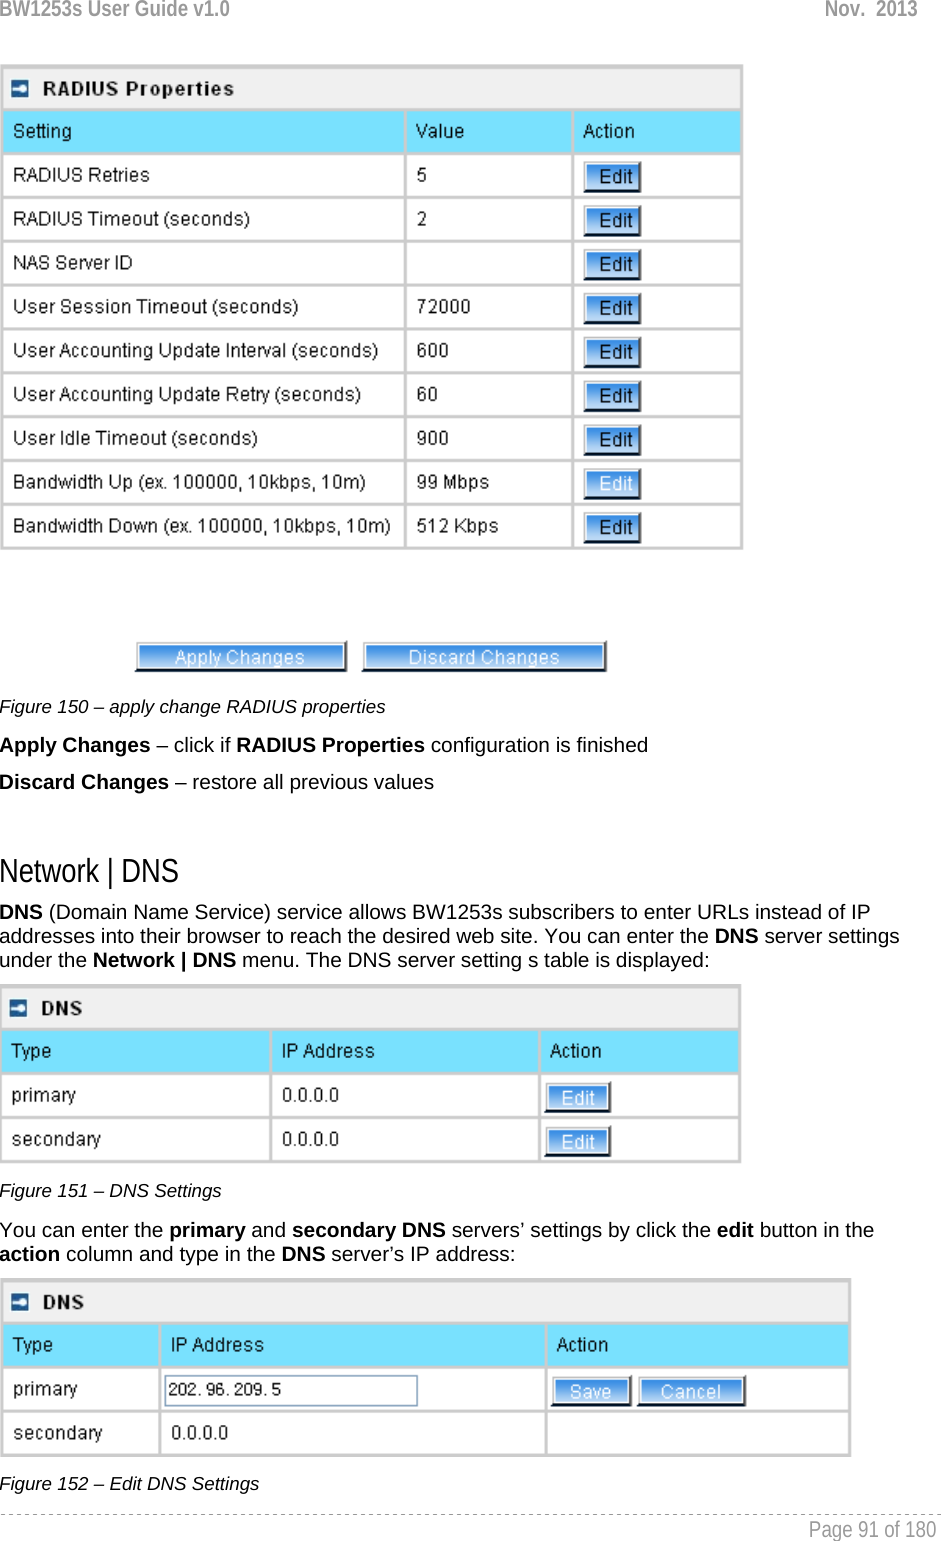 BW1253s User Guide v1.0  Nov.  2013     Page 91 of 180    Figure 150 – apply change RADIUS properties Apply Changes – click if RADIUS Properties configuration is finished Discard Changes – restore all previous values  Network | DNS DNS (Domain Name Service) service allows BW1253s subscribers to enter URLs instead of IP addresses into their browser to reach the desired web site. You can enter the DNS server settings under the Network | DNS menu. The DNS server setting s table is displayed:  Figure 151 – DNS Settings You can enter the primary and secondary DNS servers’ settings by click the edit button in the action column and type in the DNS server’s IP address:  Figure 152 – Edit DNS Settings 